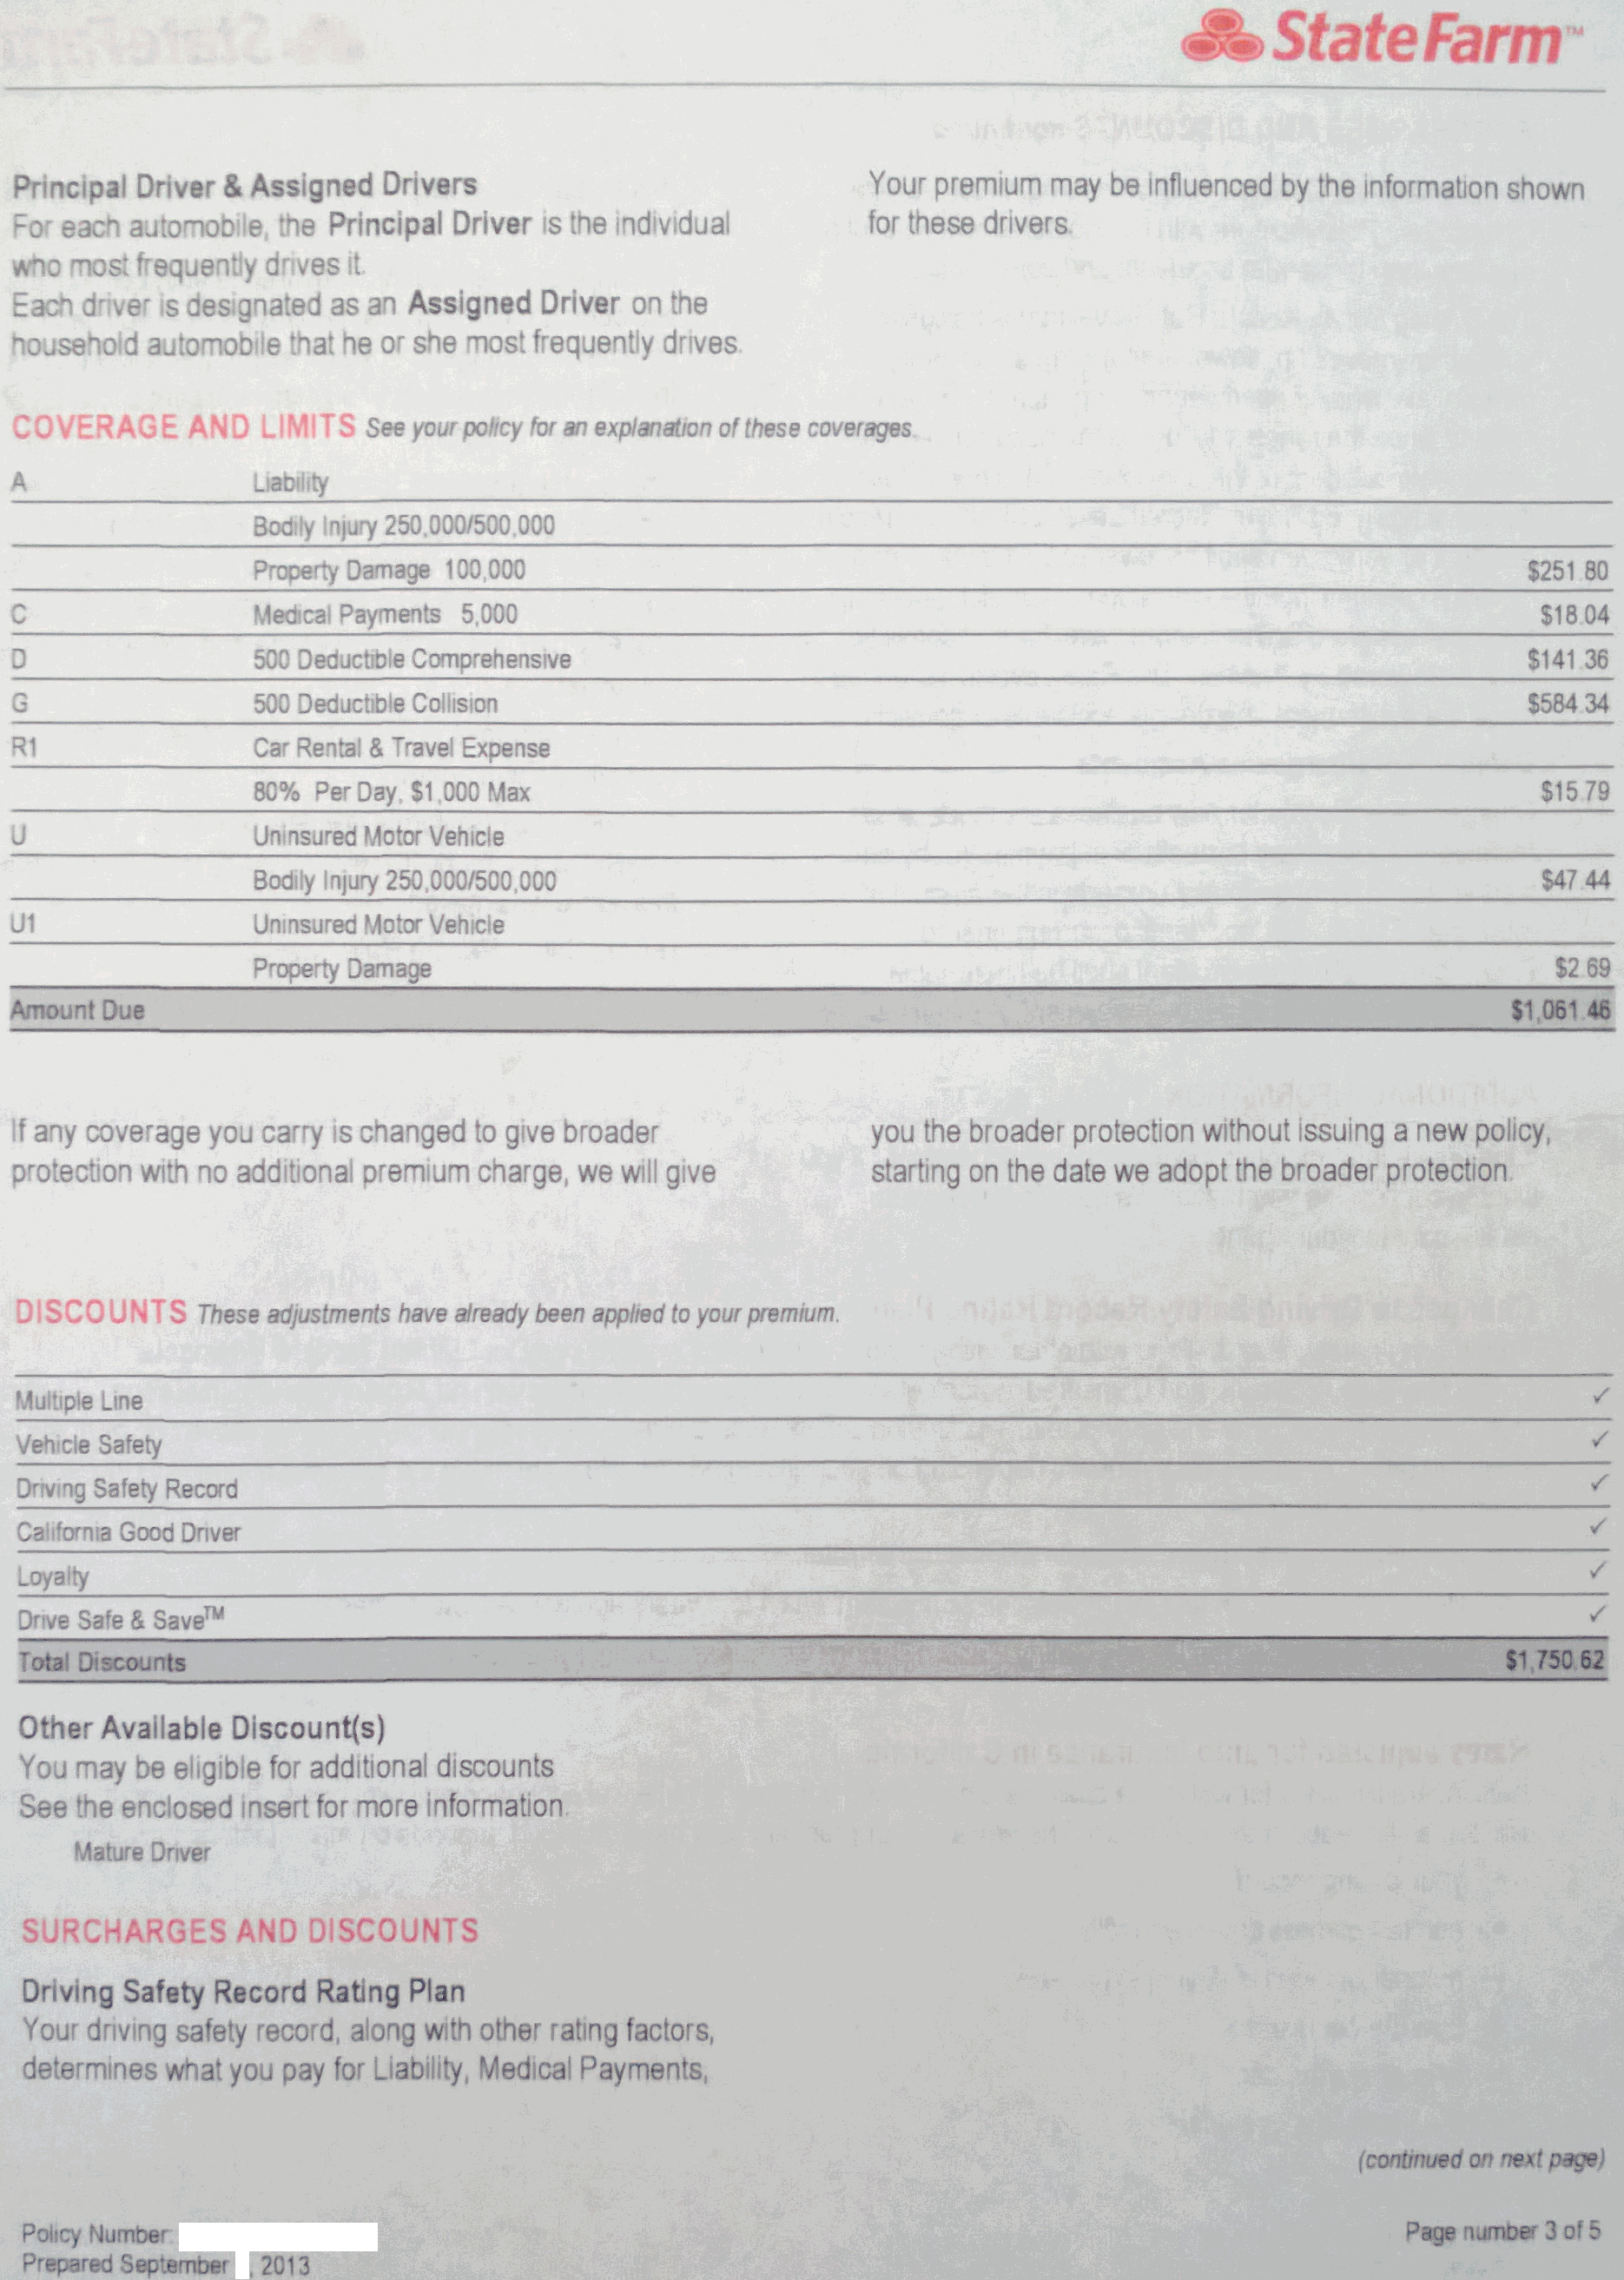 2013-09 Insurance quote b2.png